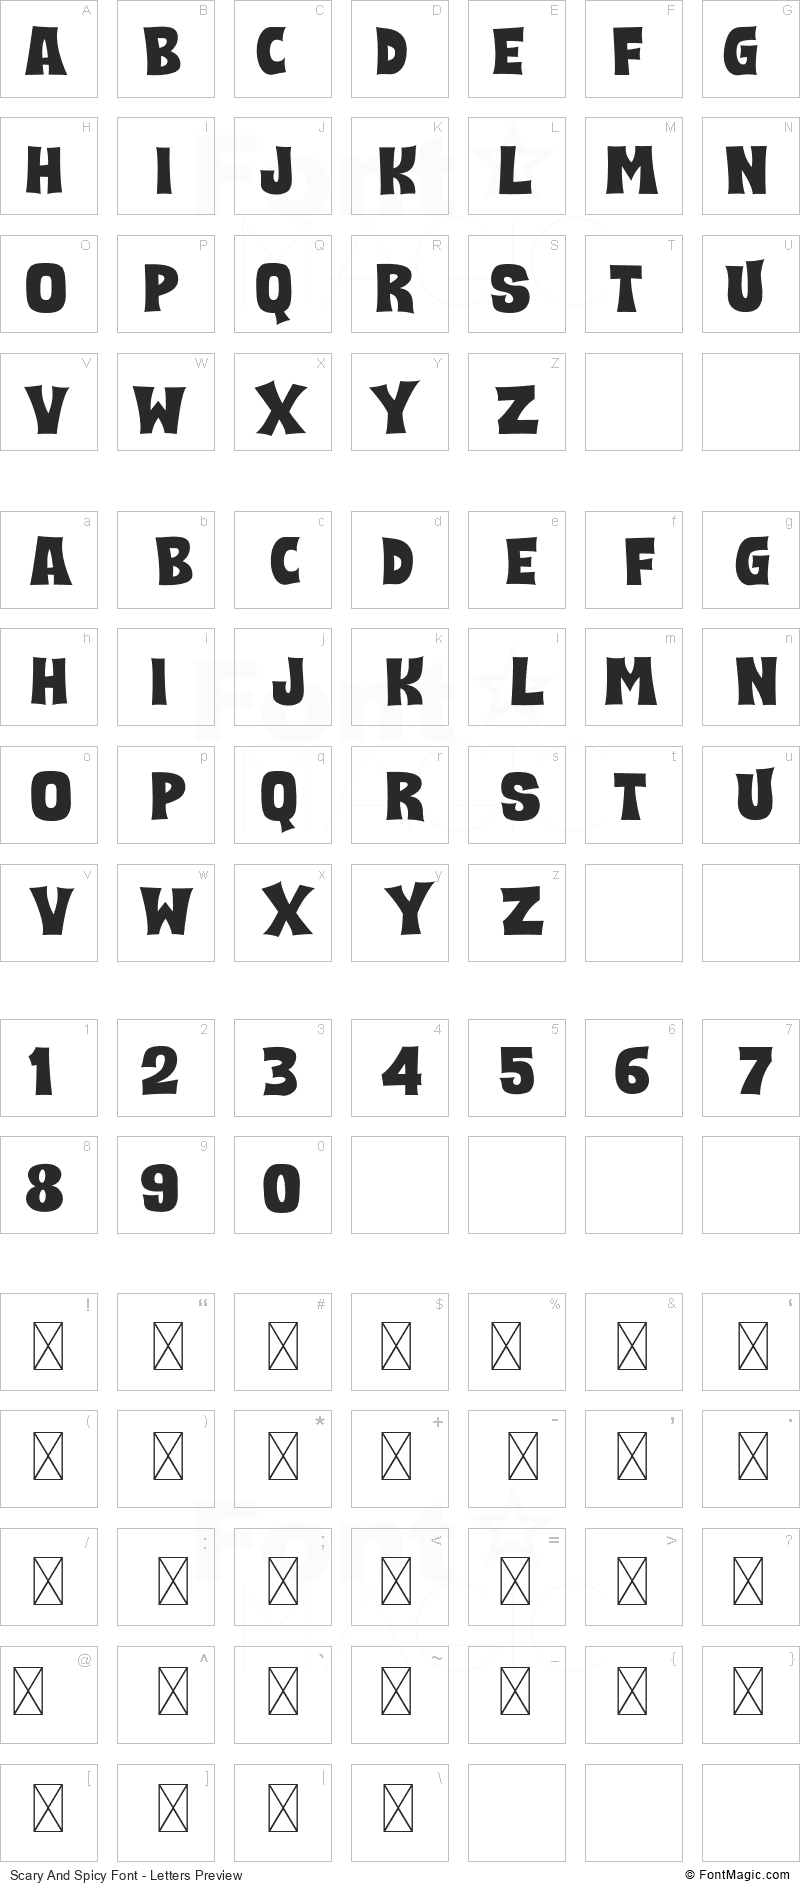 Scary And Spicy Font - All Latters Preview Chart